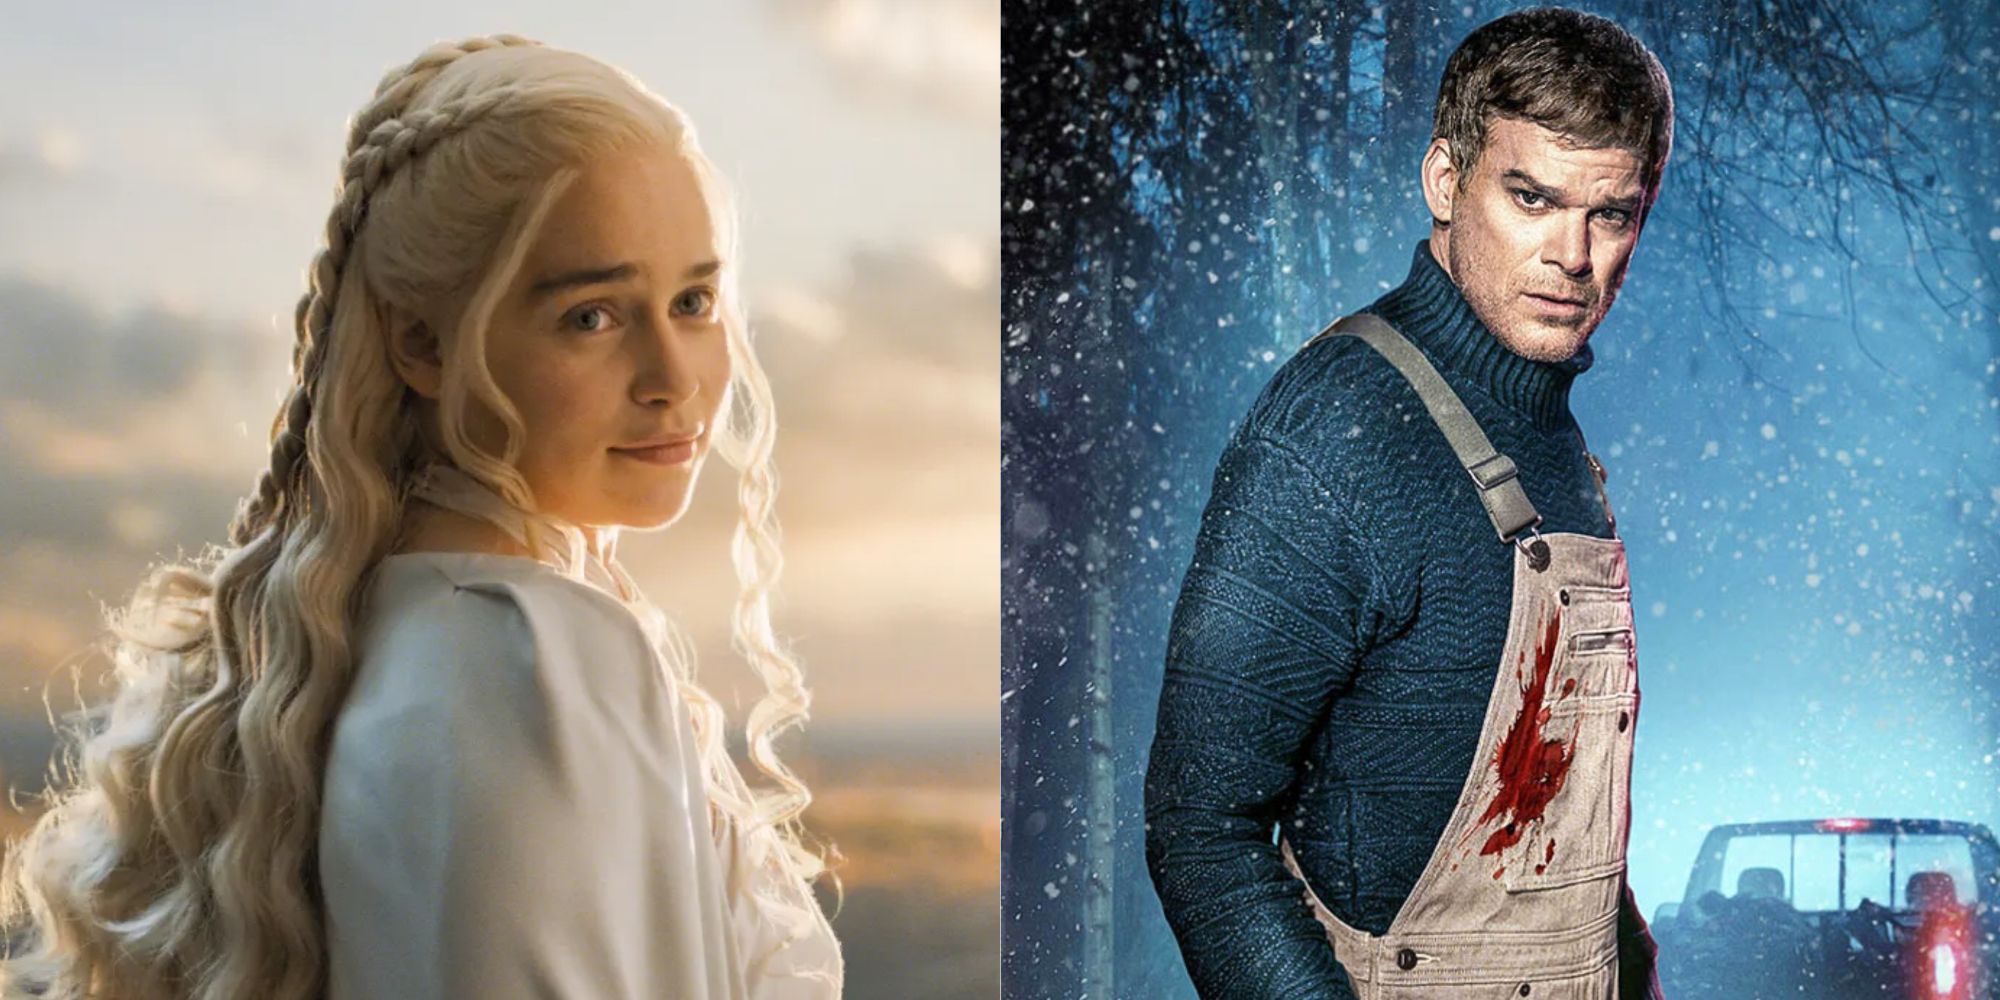 Split image of Daenerys from Game of Thrones and Dexter